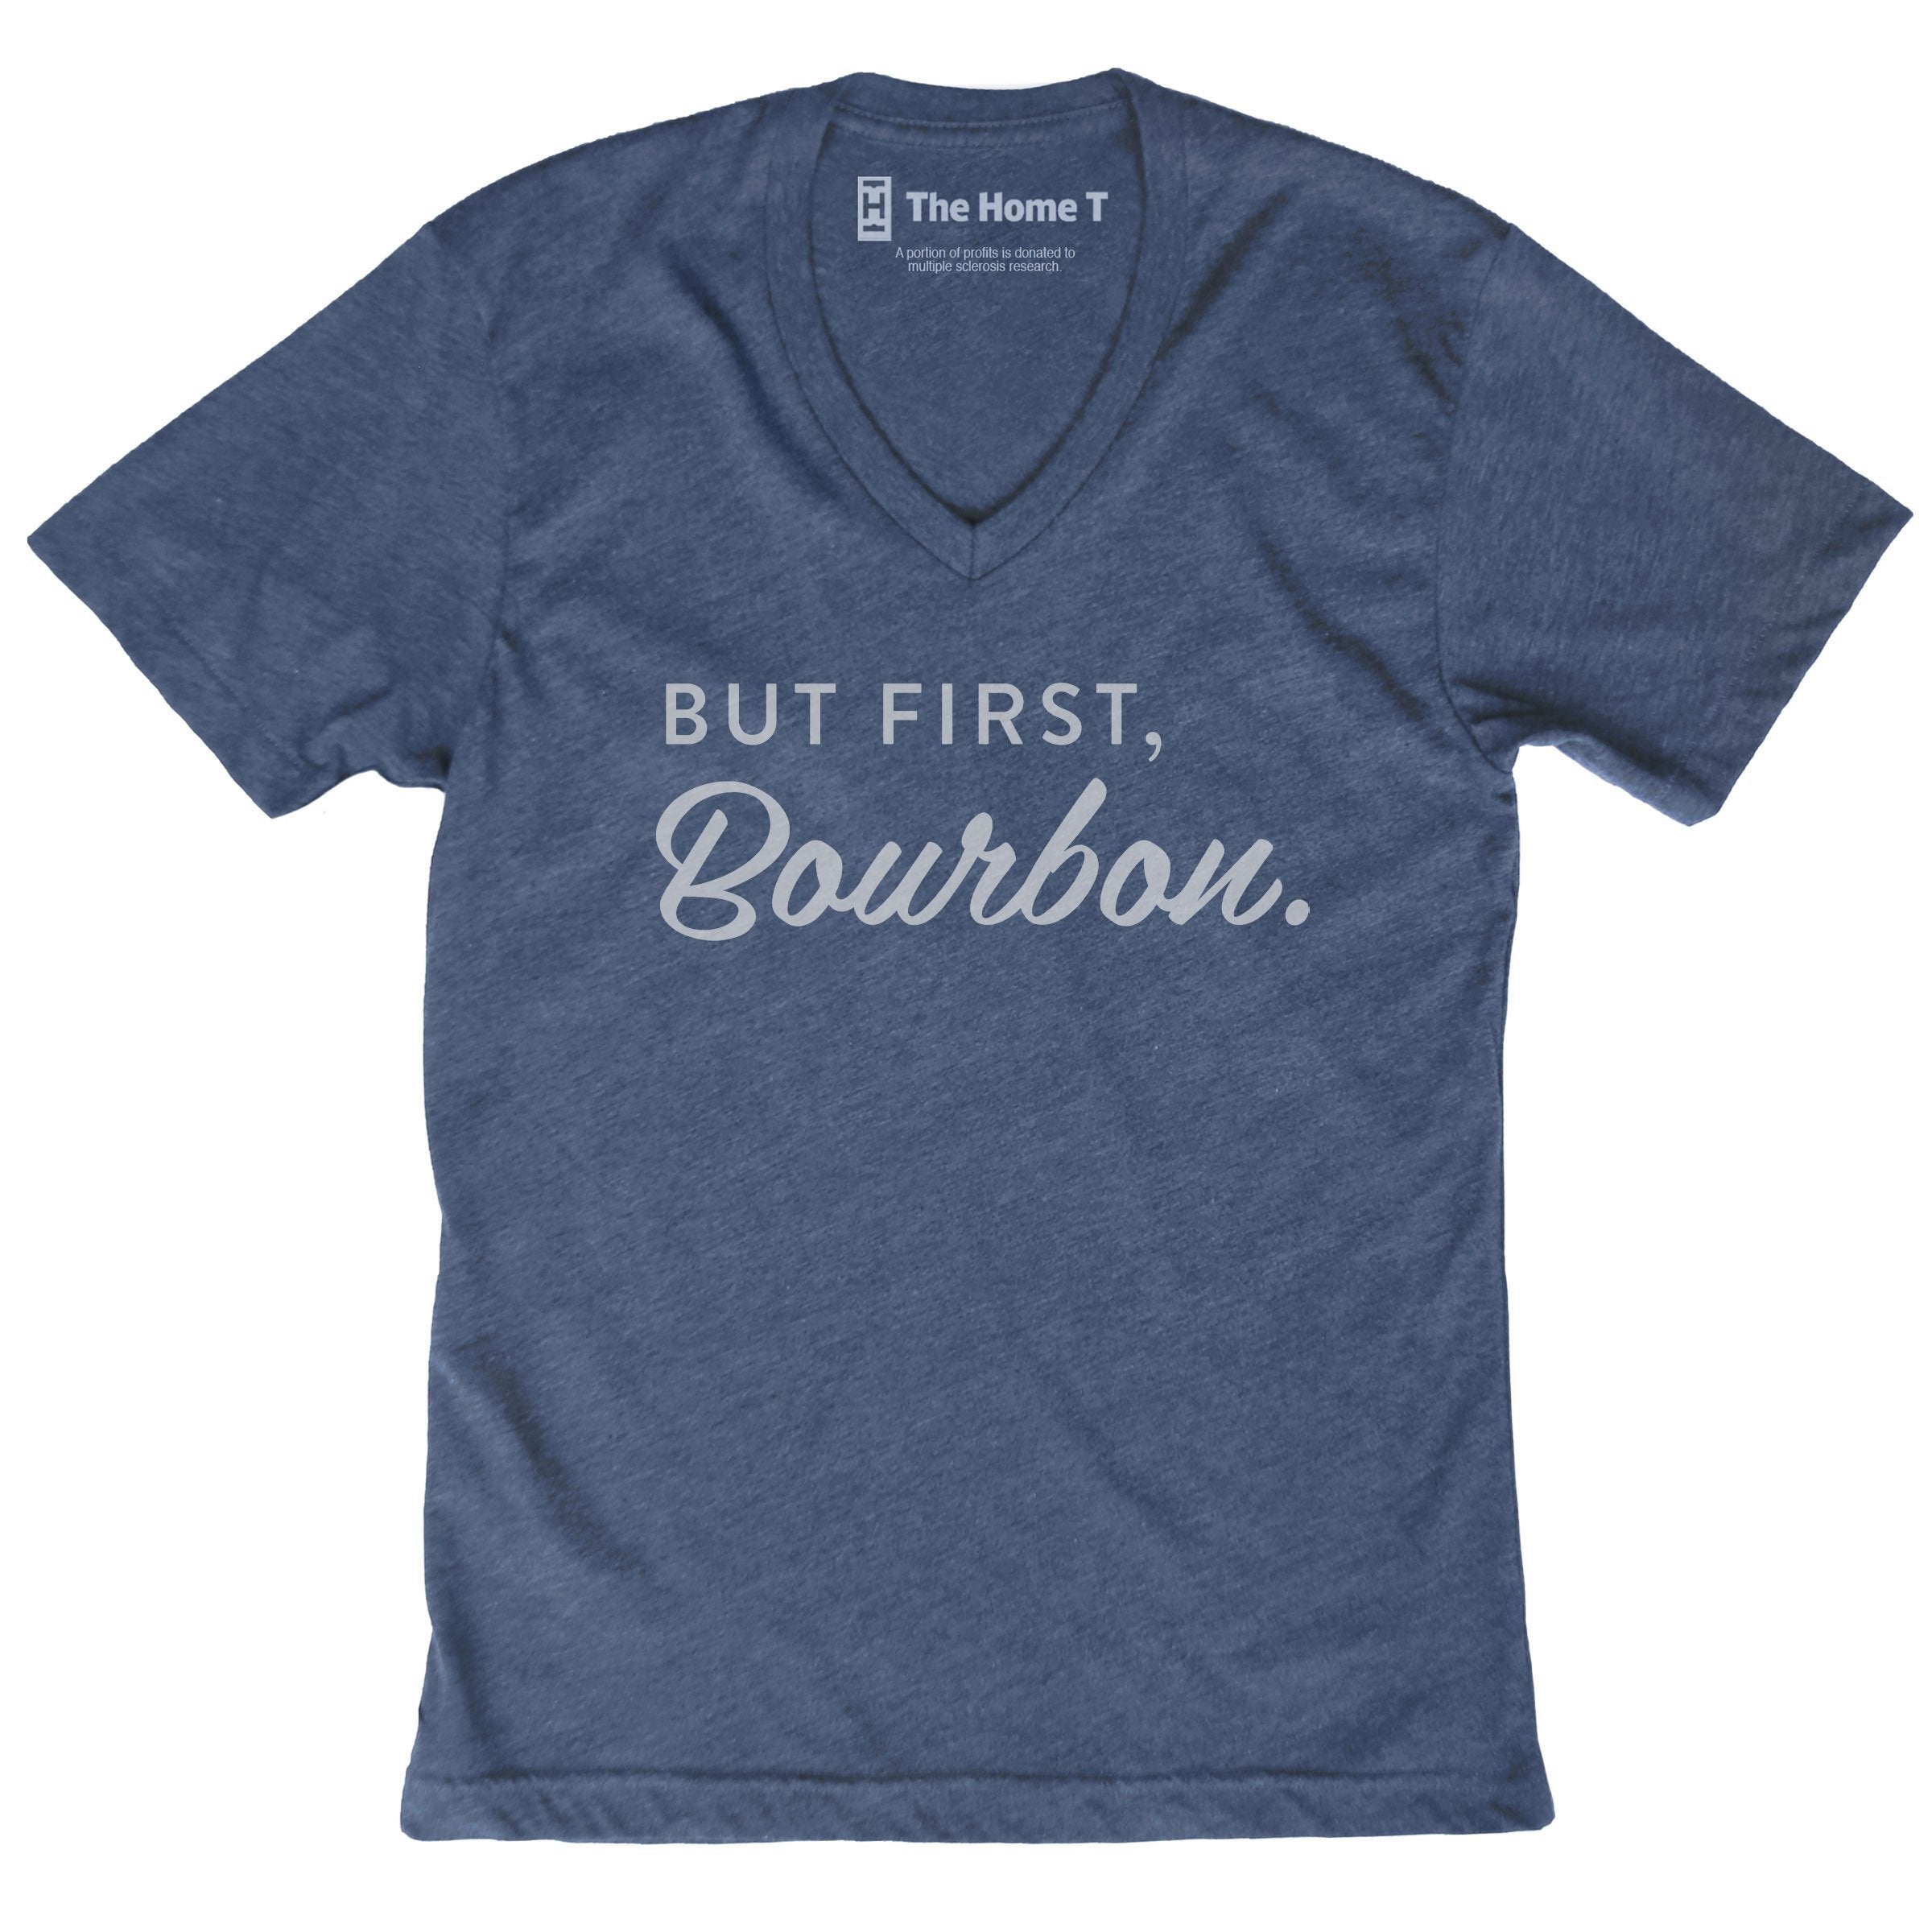 But First, Bourbon Shirts The Home T XS NAVY V Neck